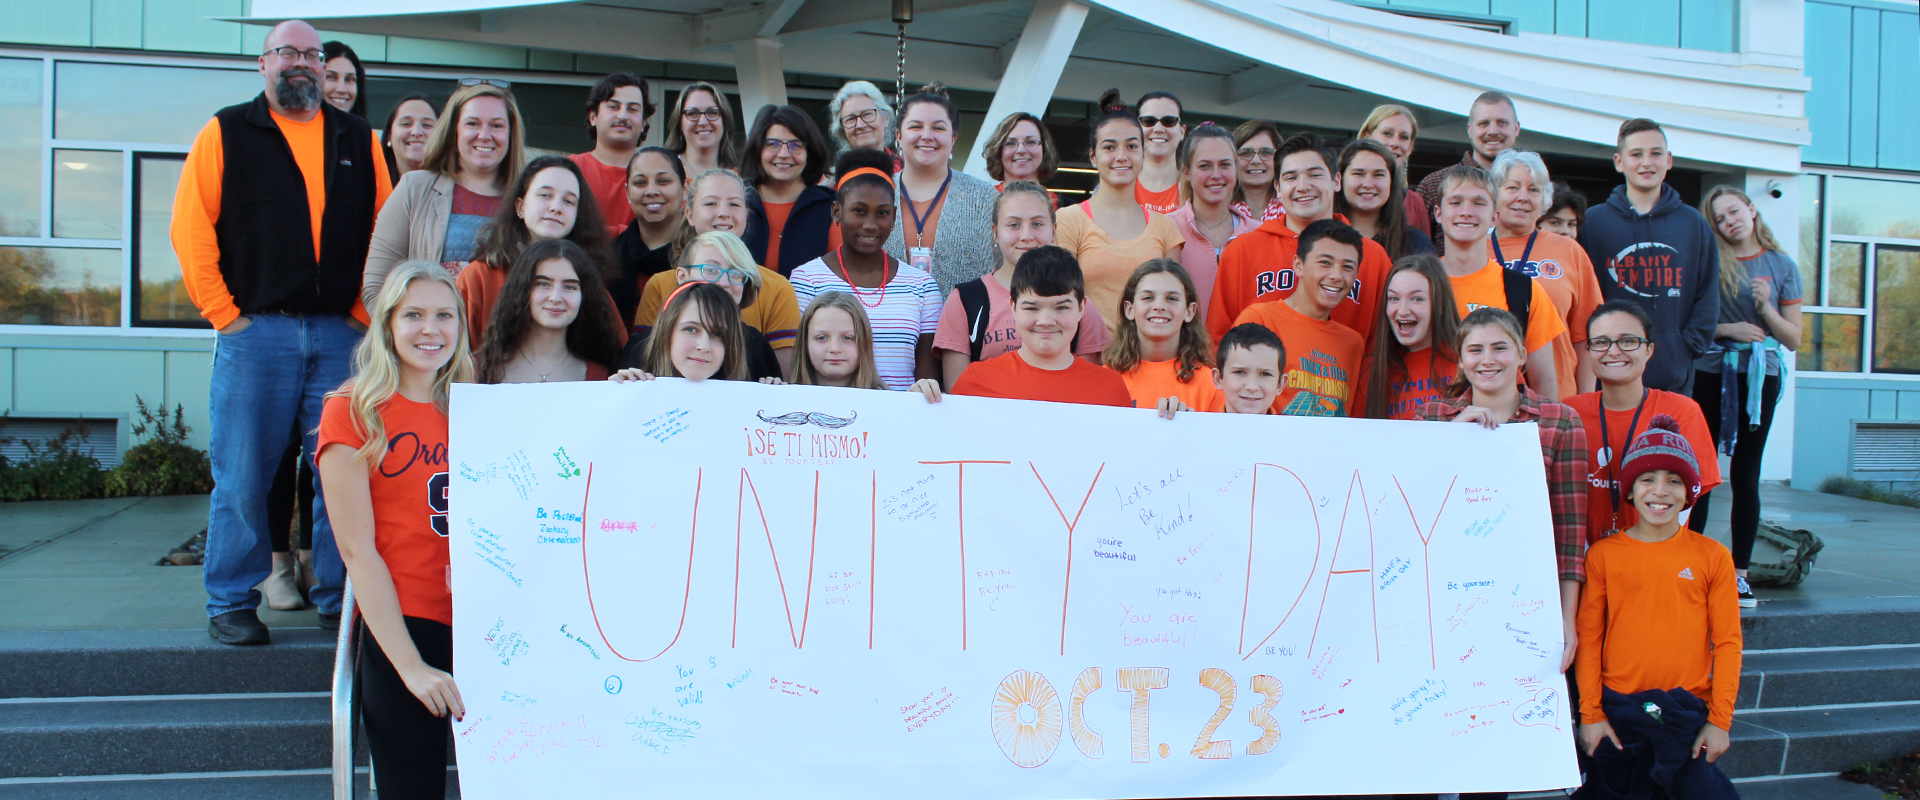 Students, faculty and staff with Unity Day banner